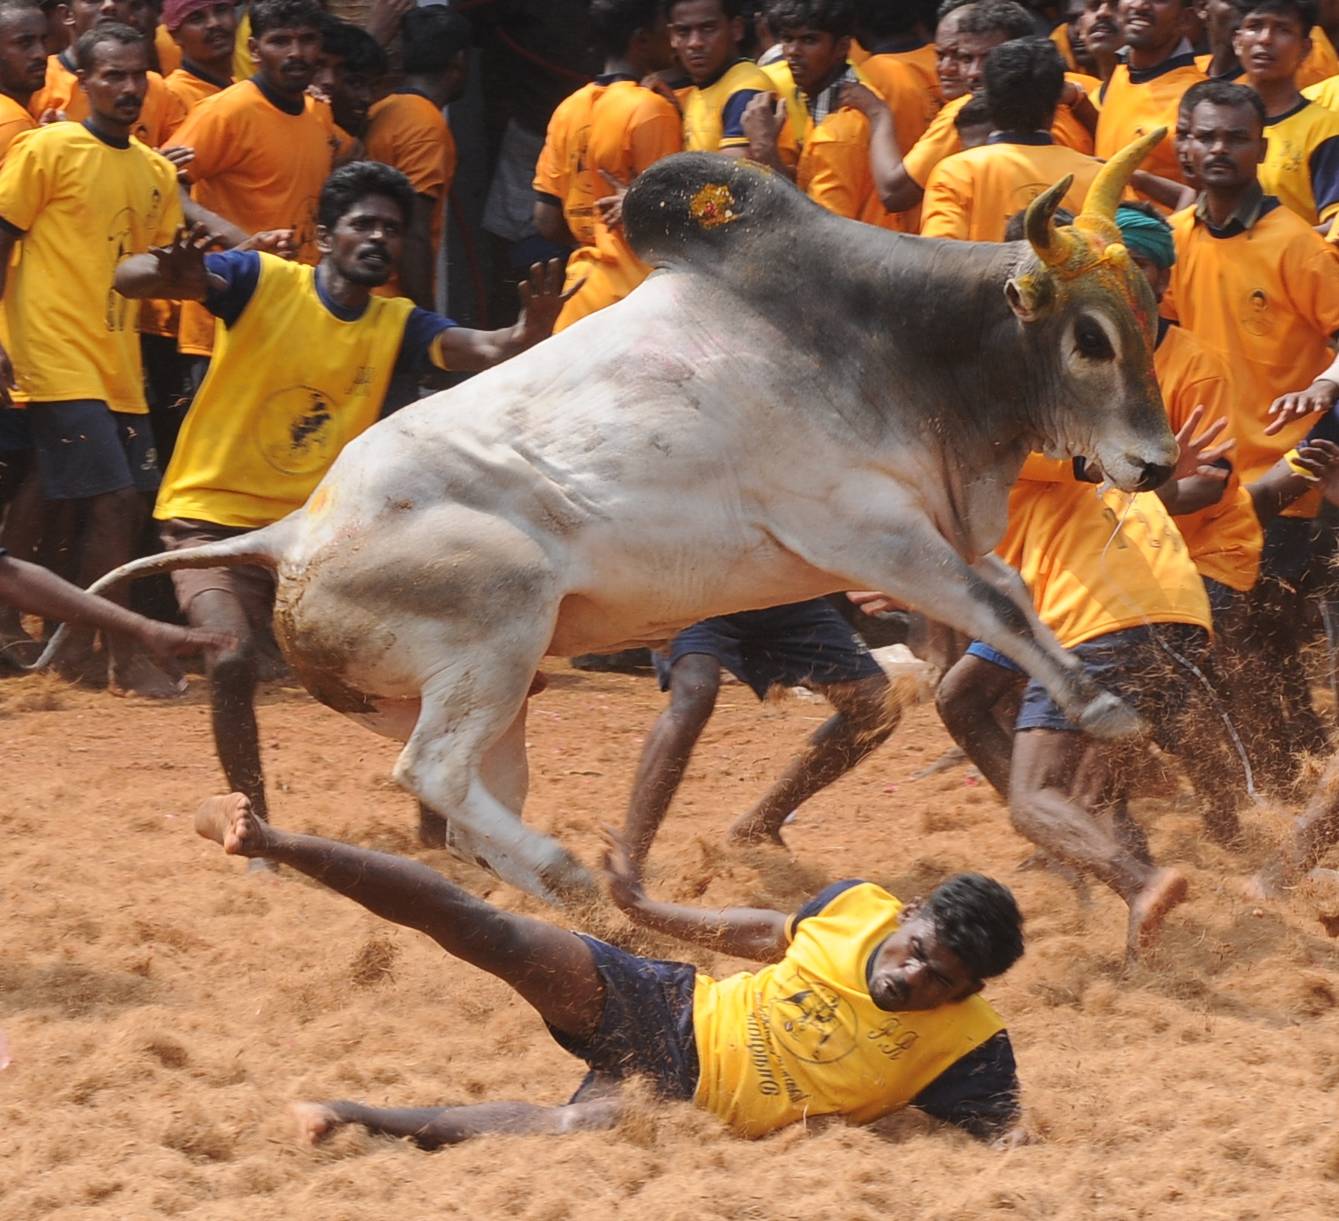 Although Supreme Court of India recently refused to lift ban on the traditional Jallikattu sport, people in Madurai are still bank hope on the central government and state government photo: K. Antony Xavier